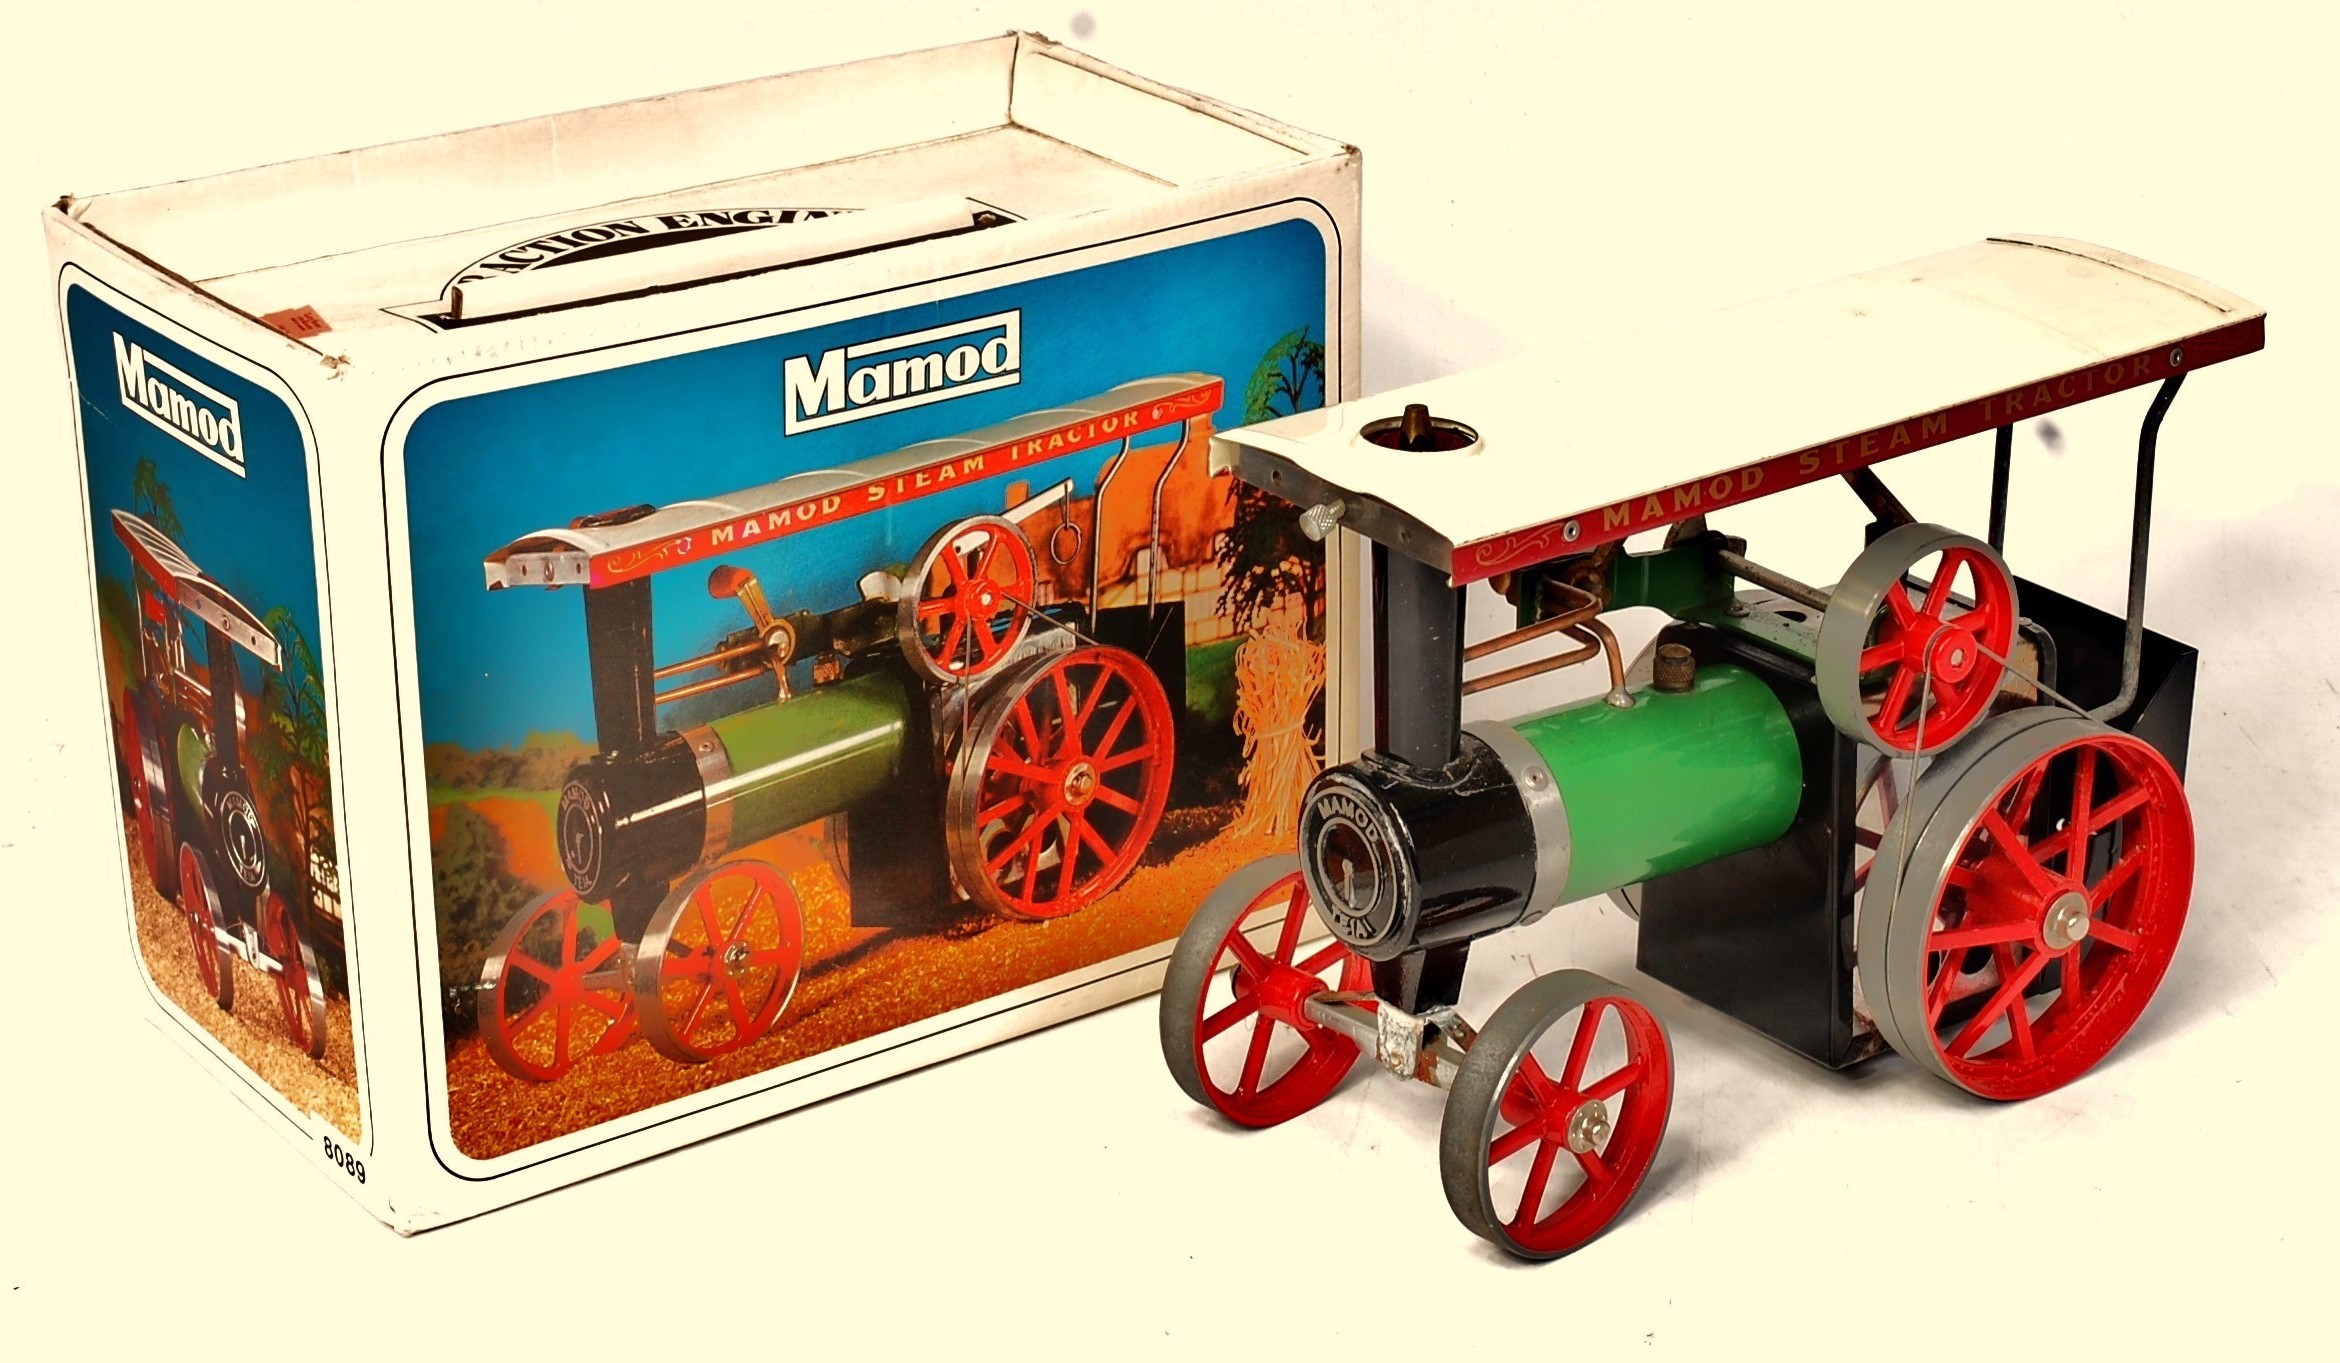 Mamod TE1A Live Steam Traction Engine, finished in green with white canopy and red detailing,